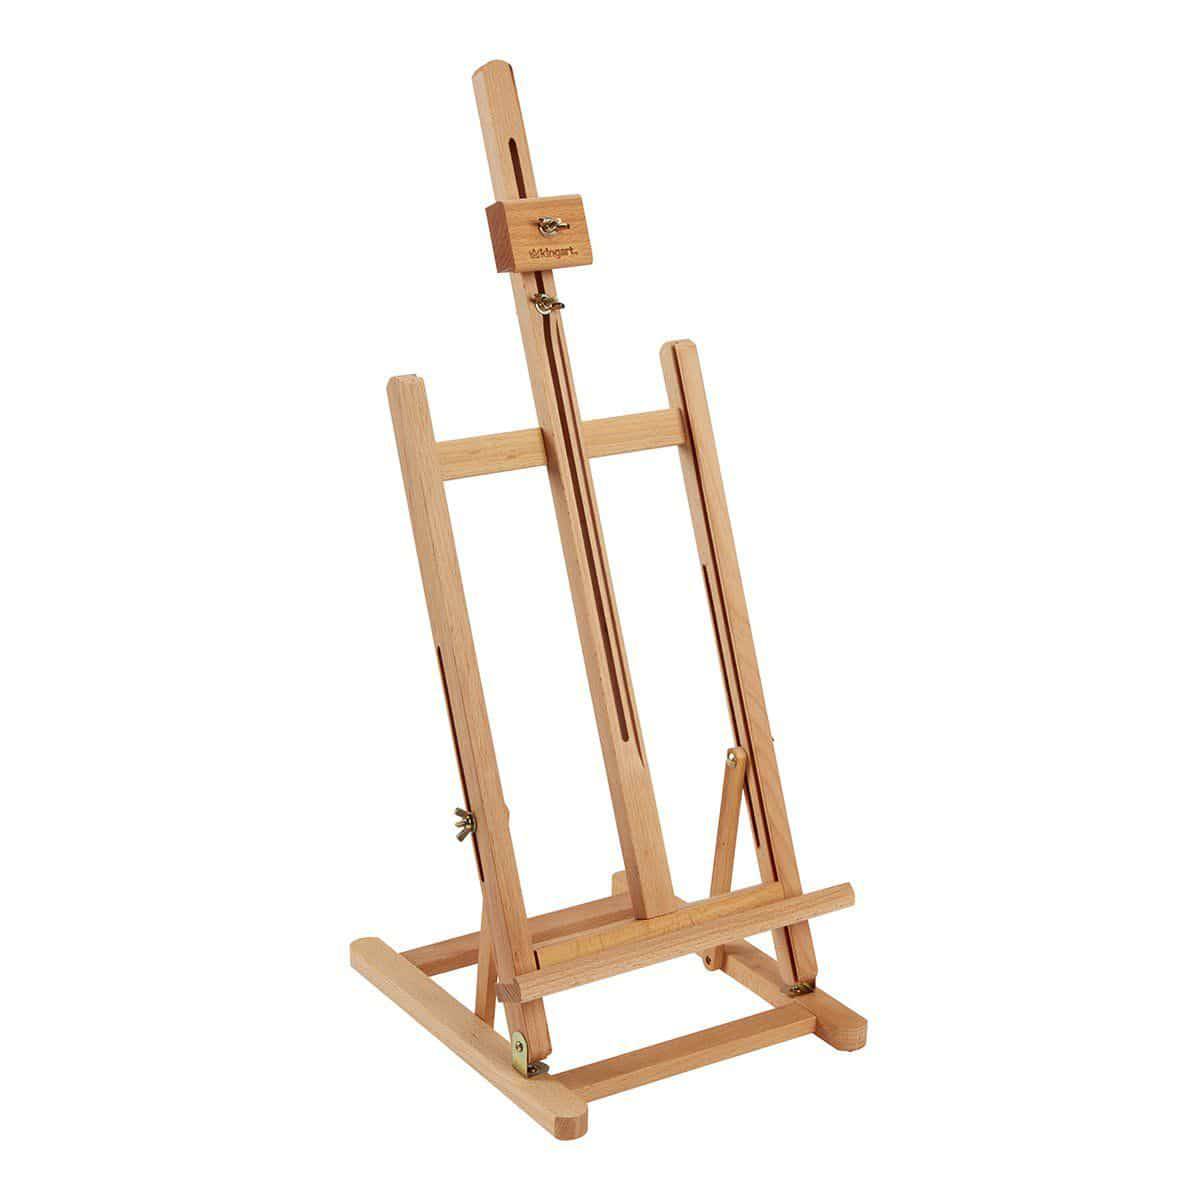 WOODEN EASEL STAND > Solid Wooden Tabletop Artist Studio Easel